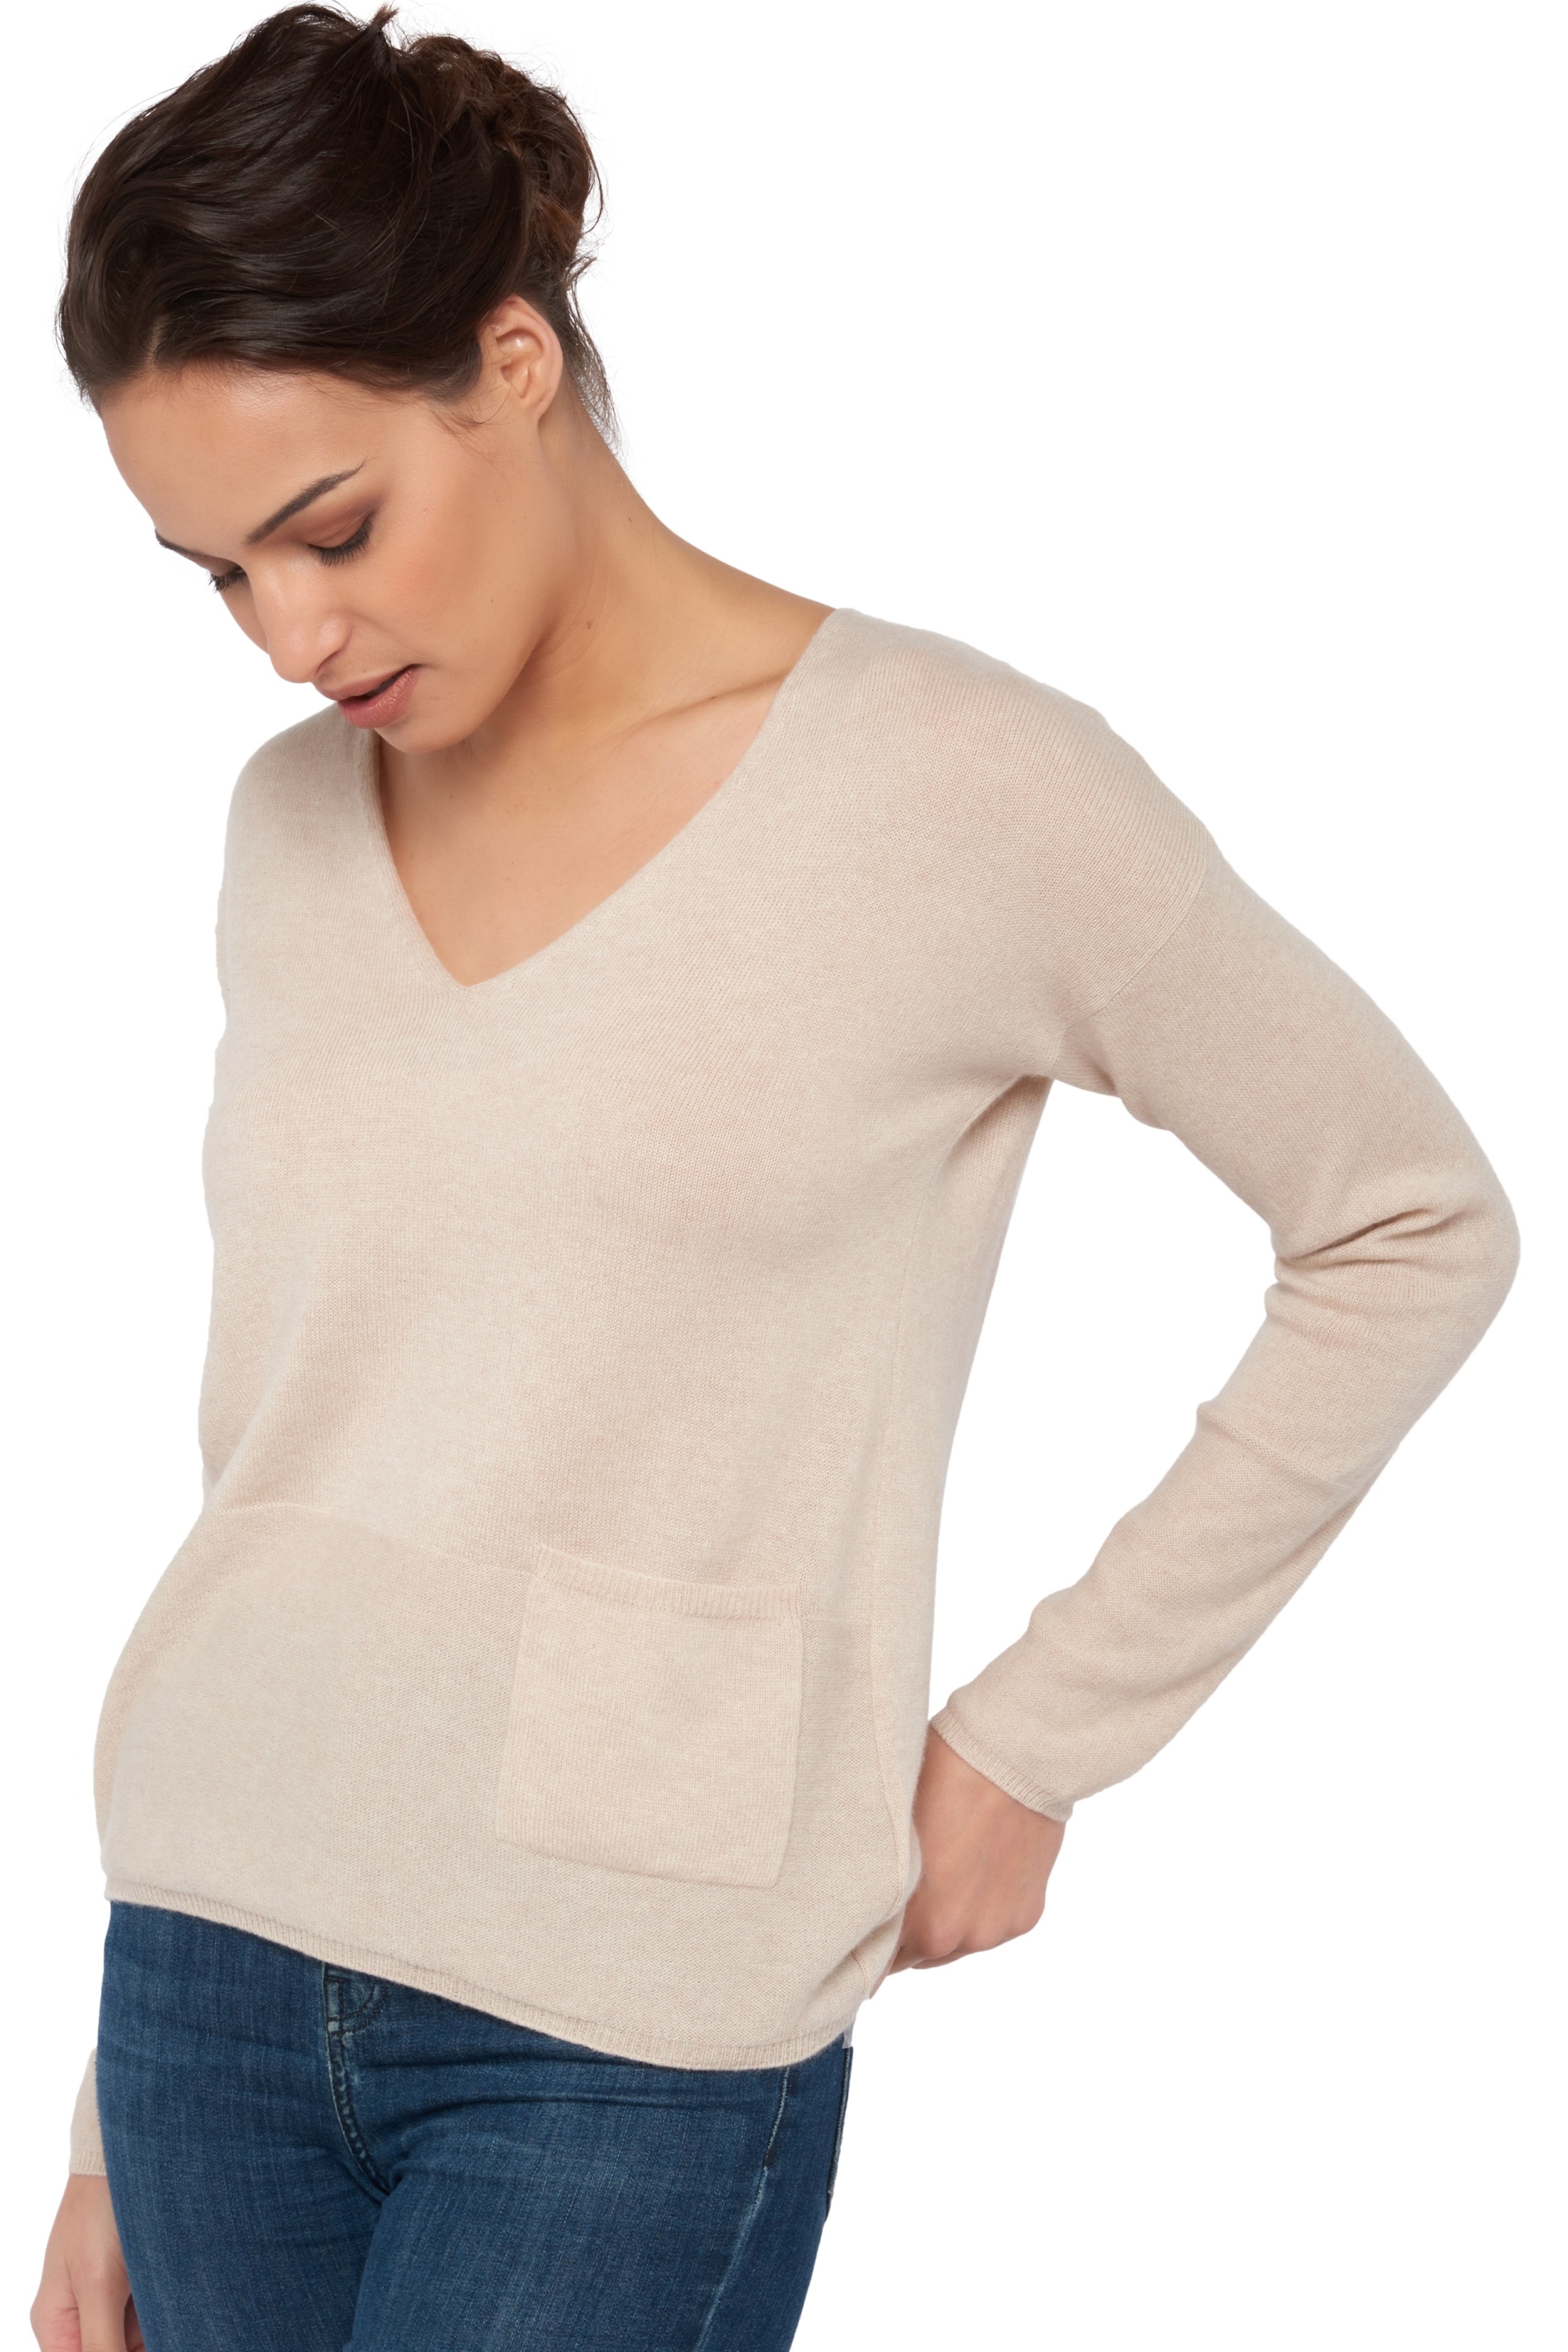 Cachemire pull femme soldes uliana natural beige s